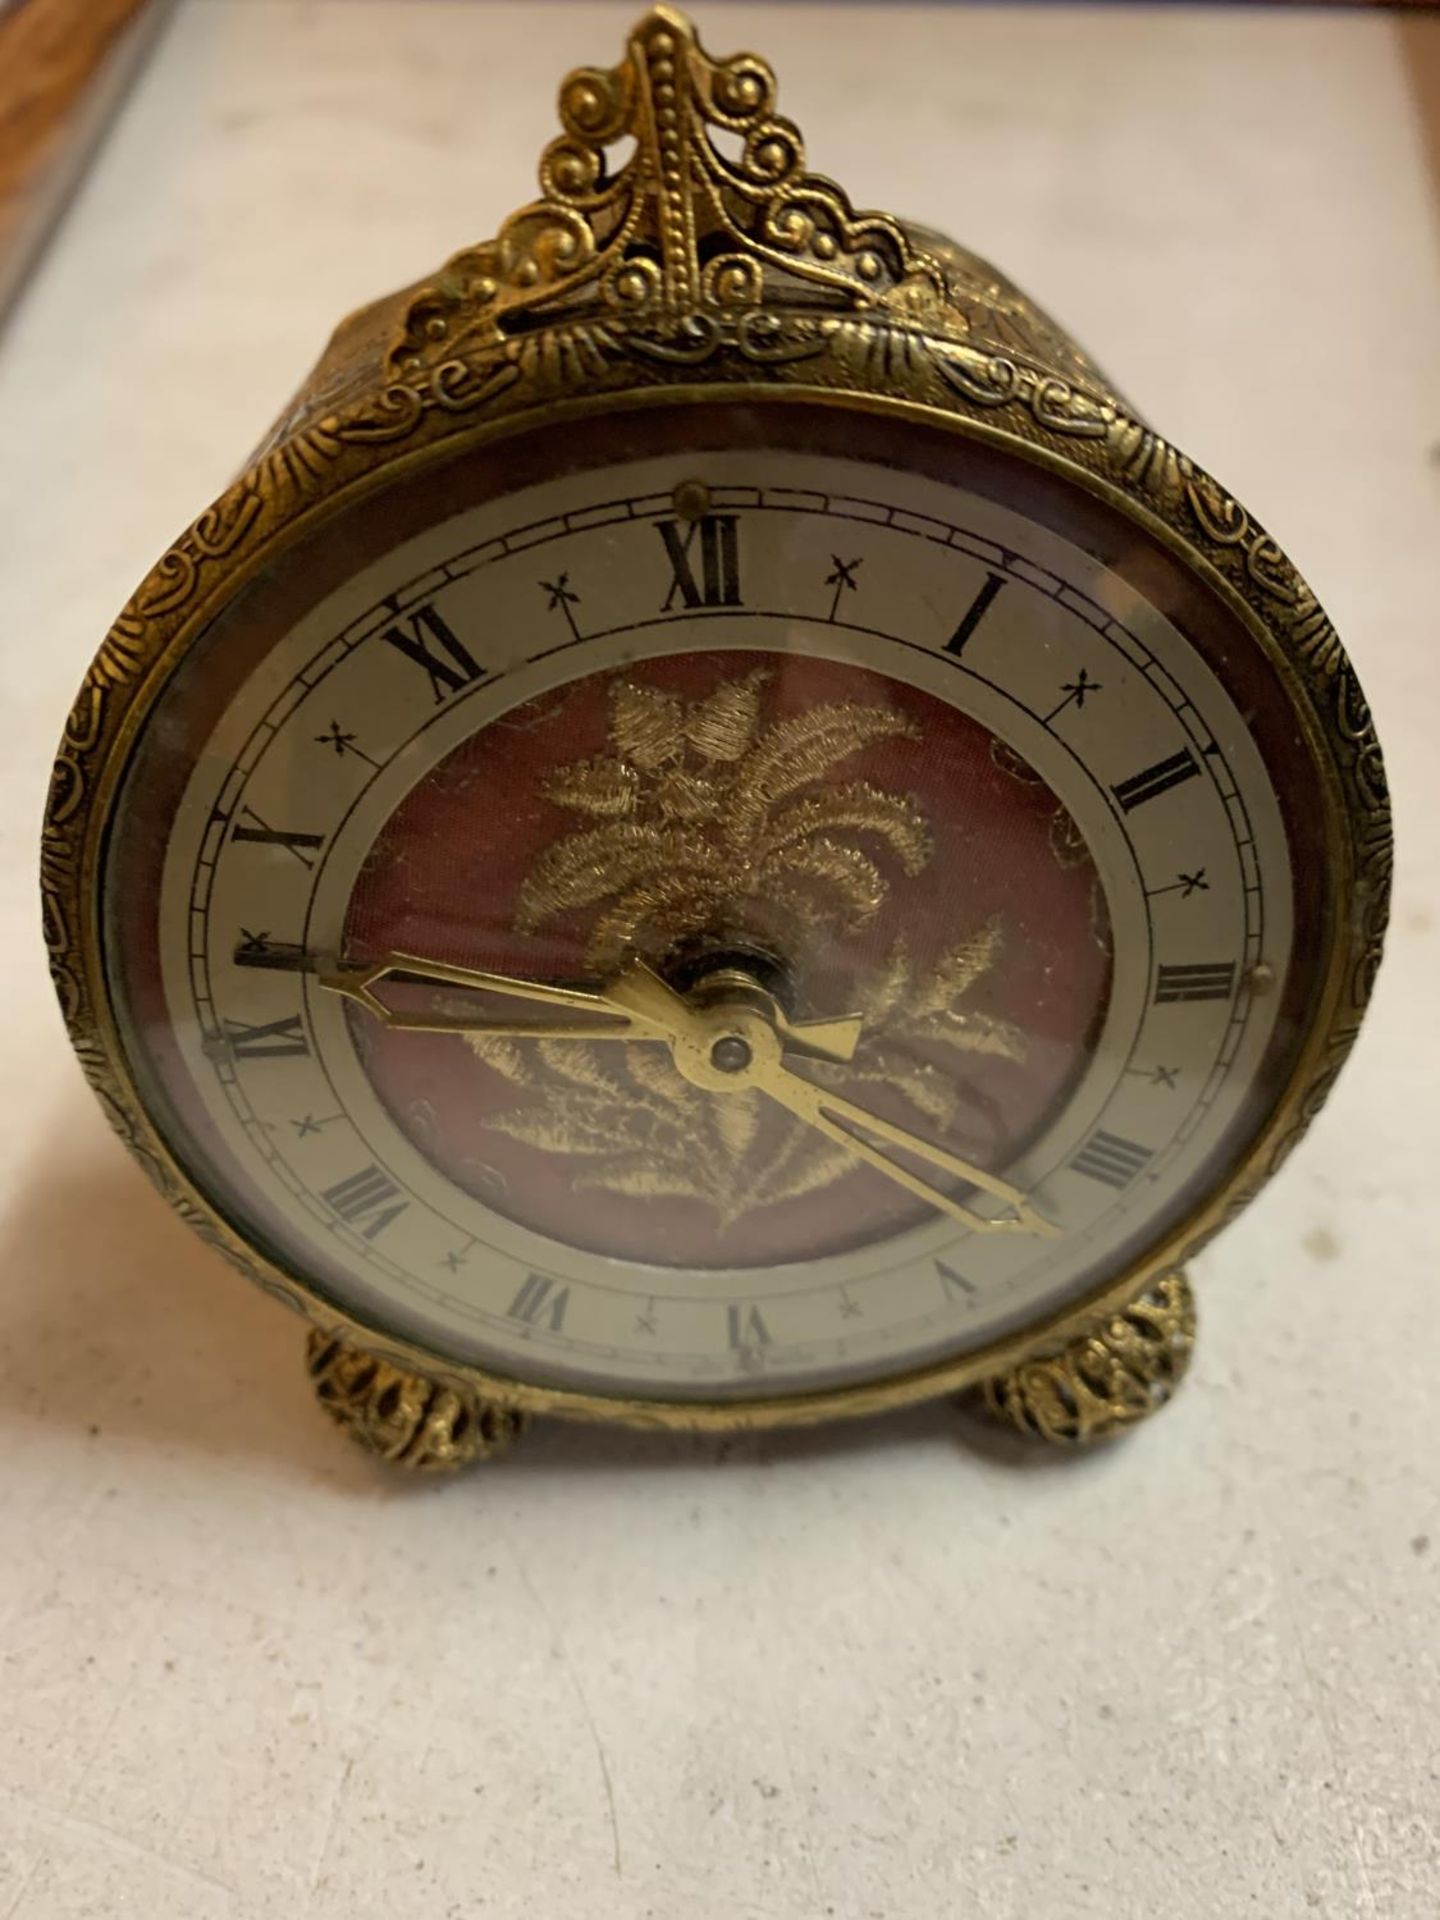 A VINTAGE ORNATE GILT ALARM CLOCK WITH EMBRIODERED FACE